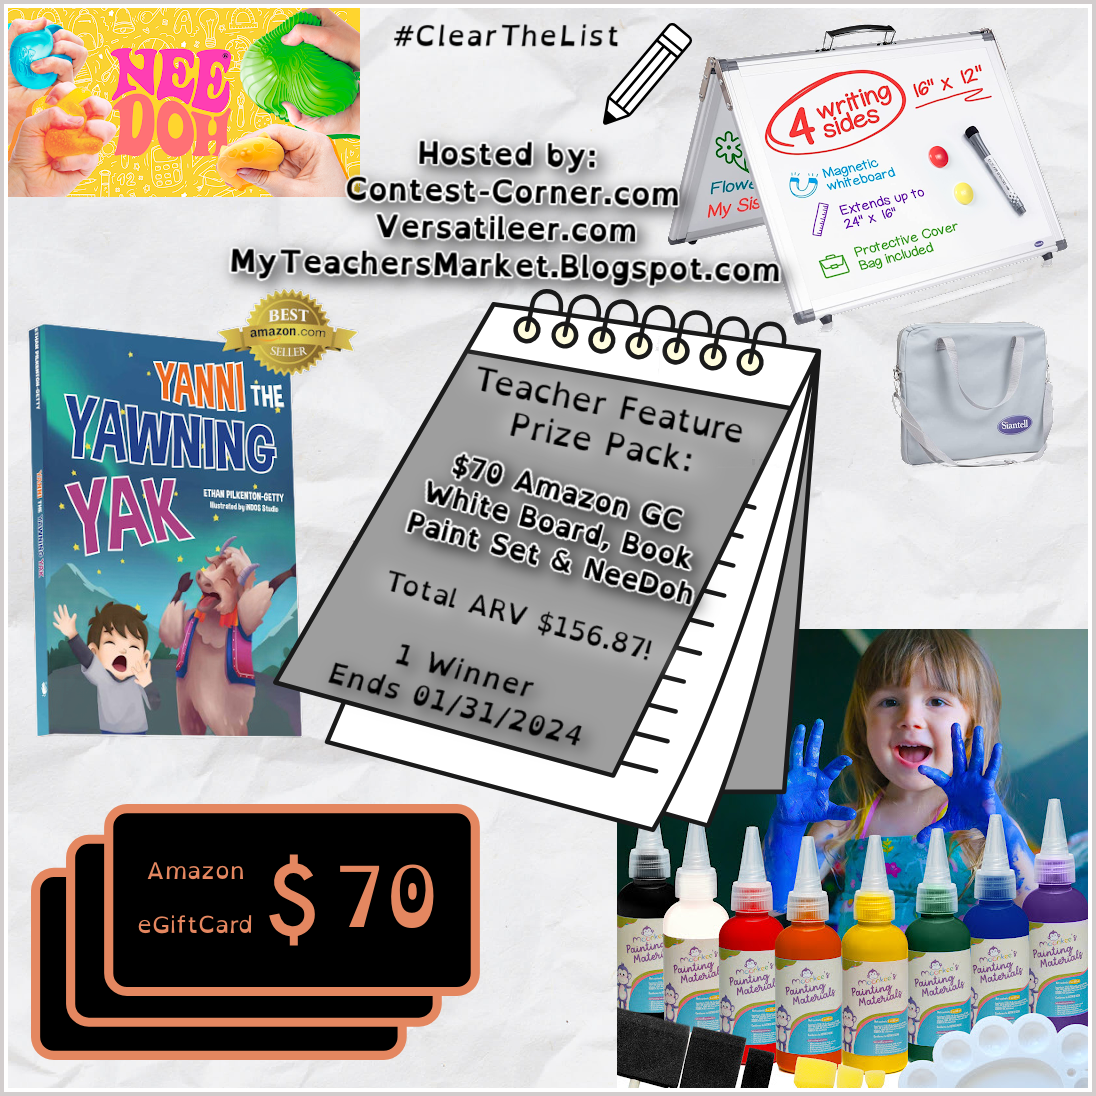 January #ClearTheList Giveaway: $70 Amazon, White Board, Paint Set, Book + NeeDoh – Prize Pack ARV $156.87! Ends 01/31/2024